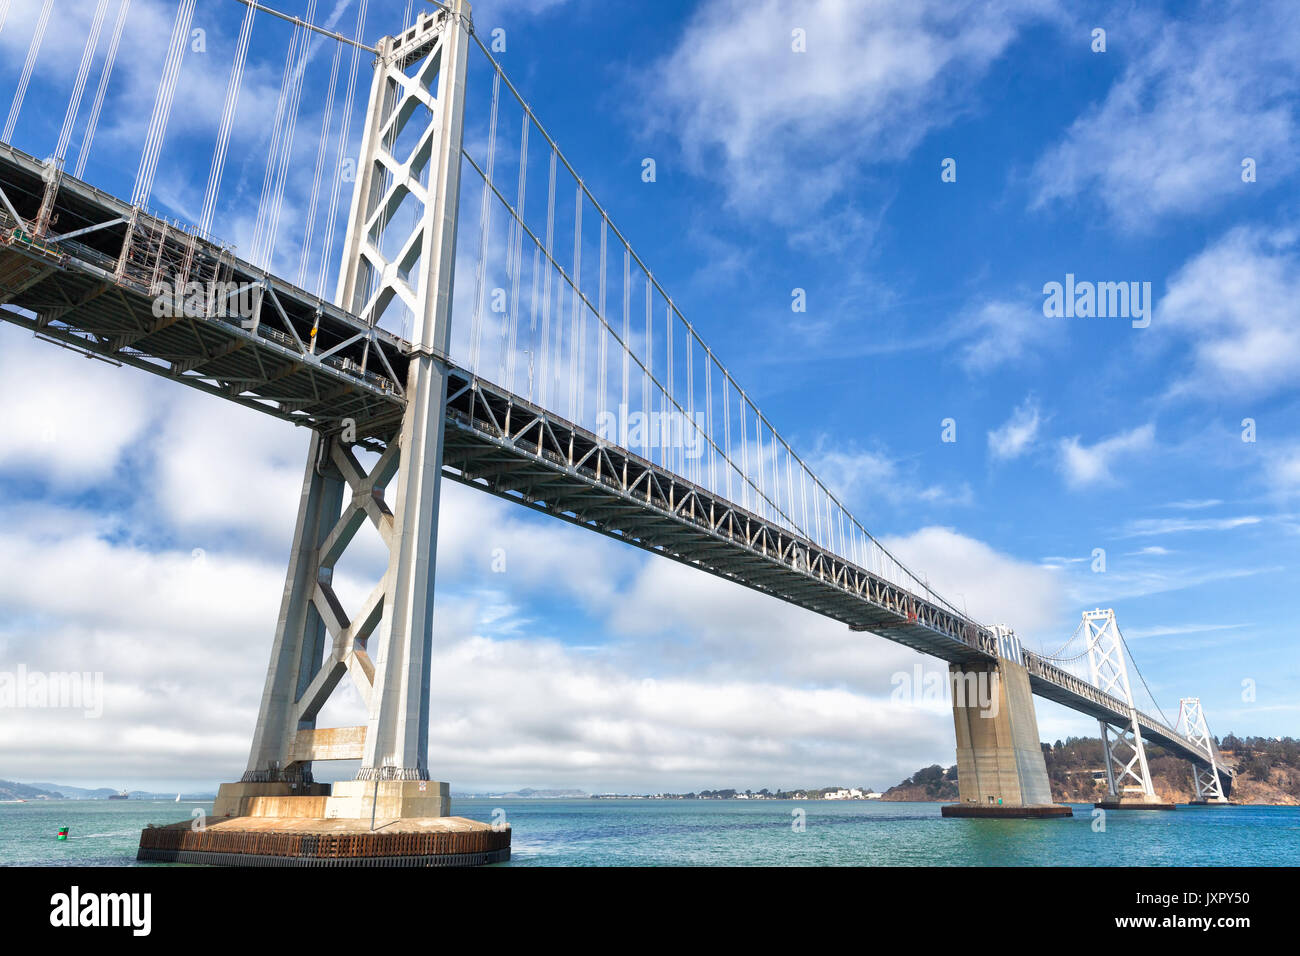 San Francisco Oakland Bay Bridge. Wide angle view from water level. Looking toward Treasure Island. Blue sky with beautiful white clouds. Stock Photo